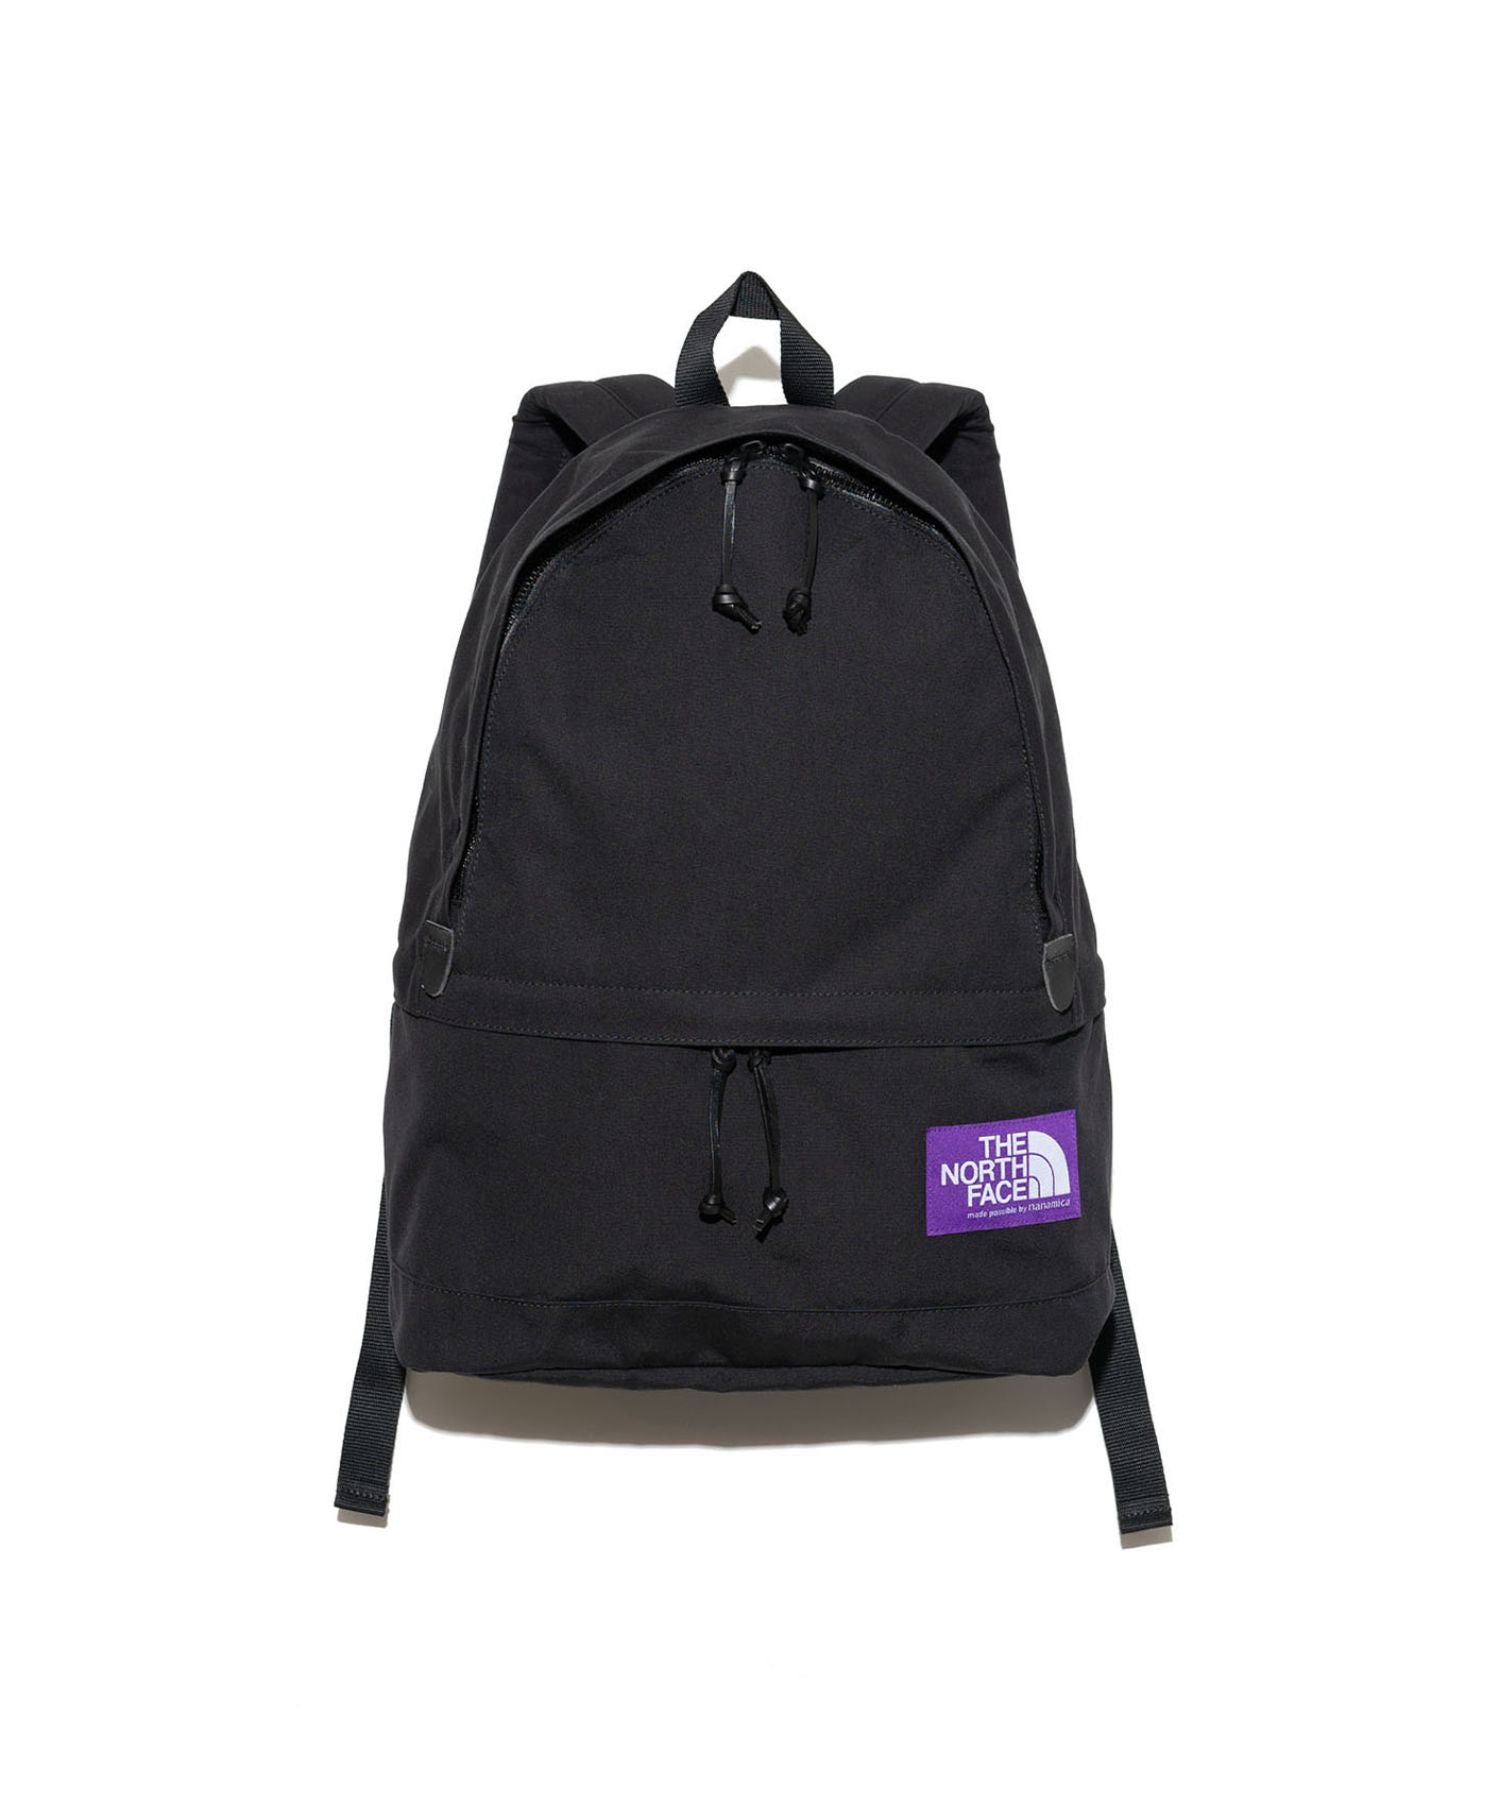 Field Day Pack - THE NORTH FACE PURPLE LABEL (ザ・ノース・フェイス